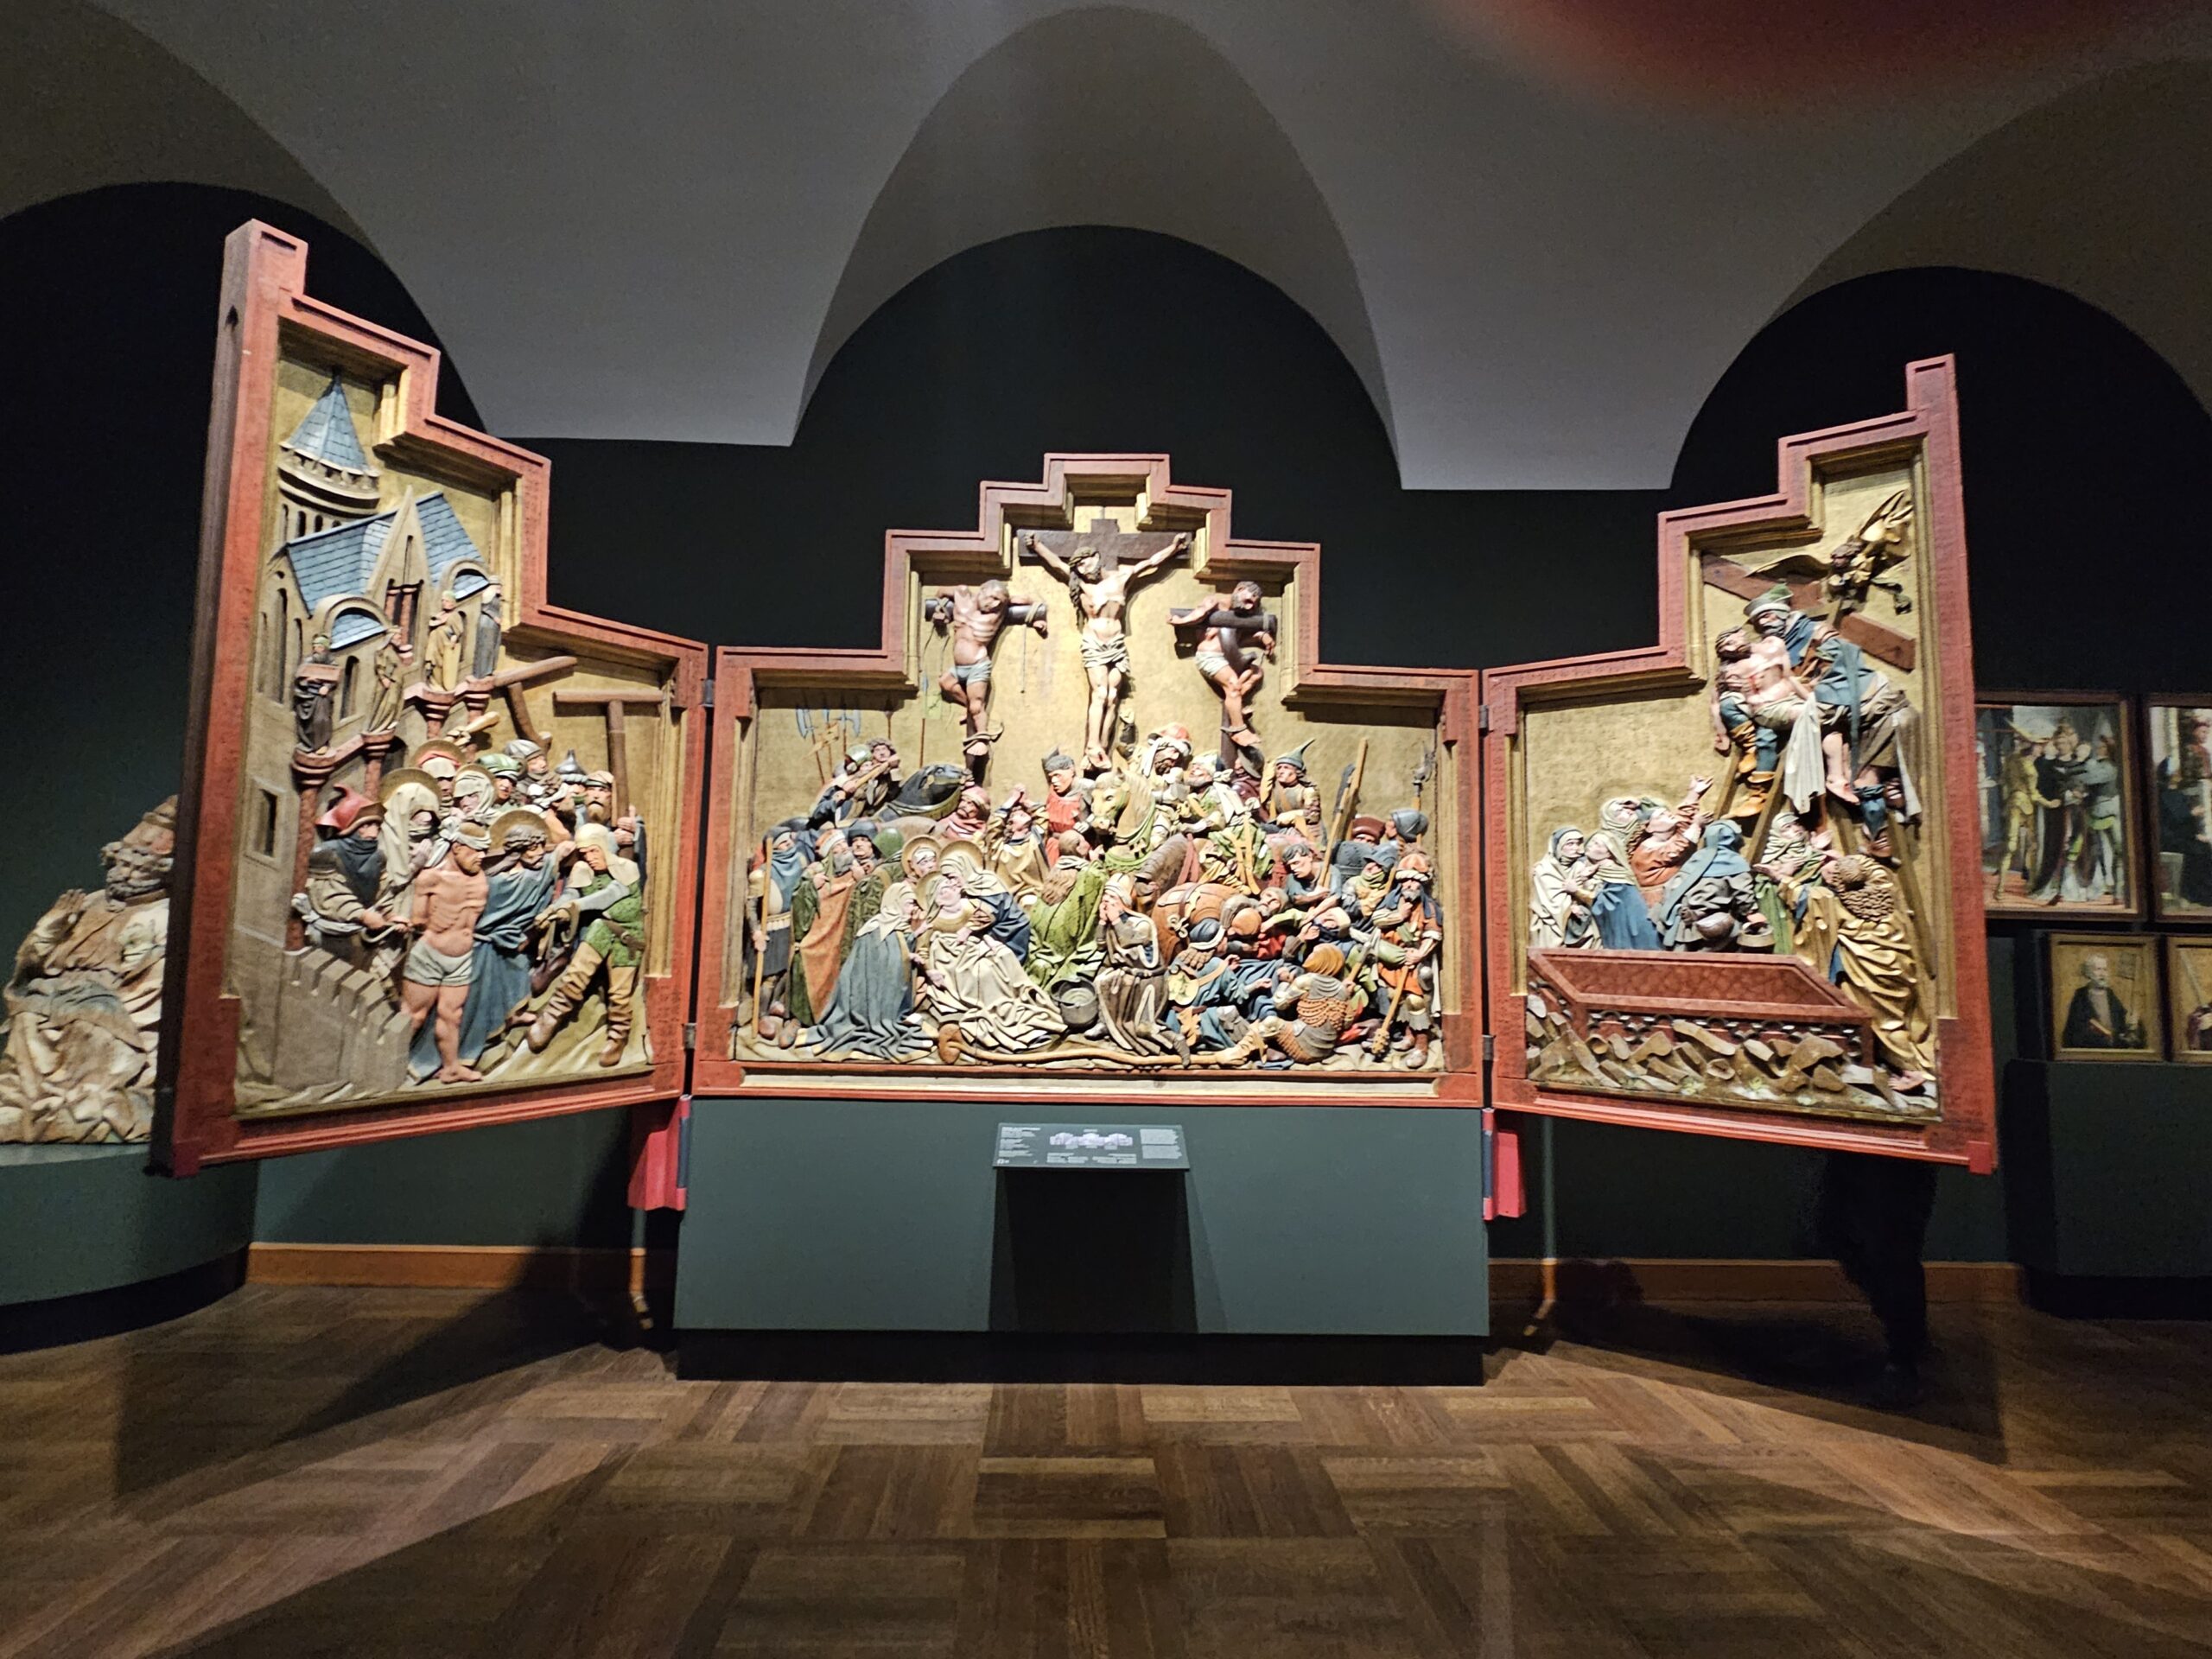 Winged Alterpiece, housed at the Belevedere Museum, Vienna.